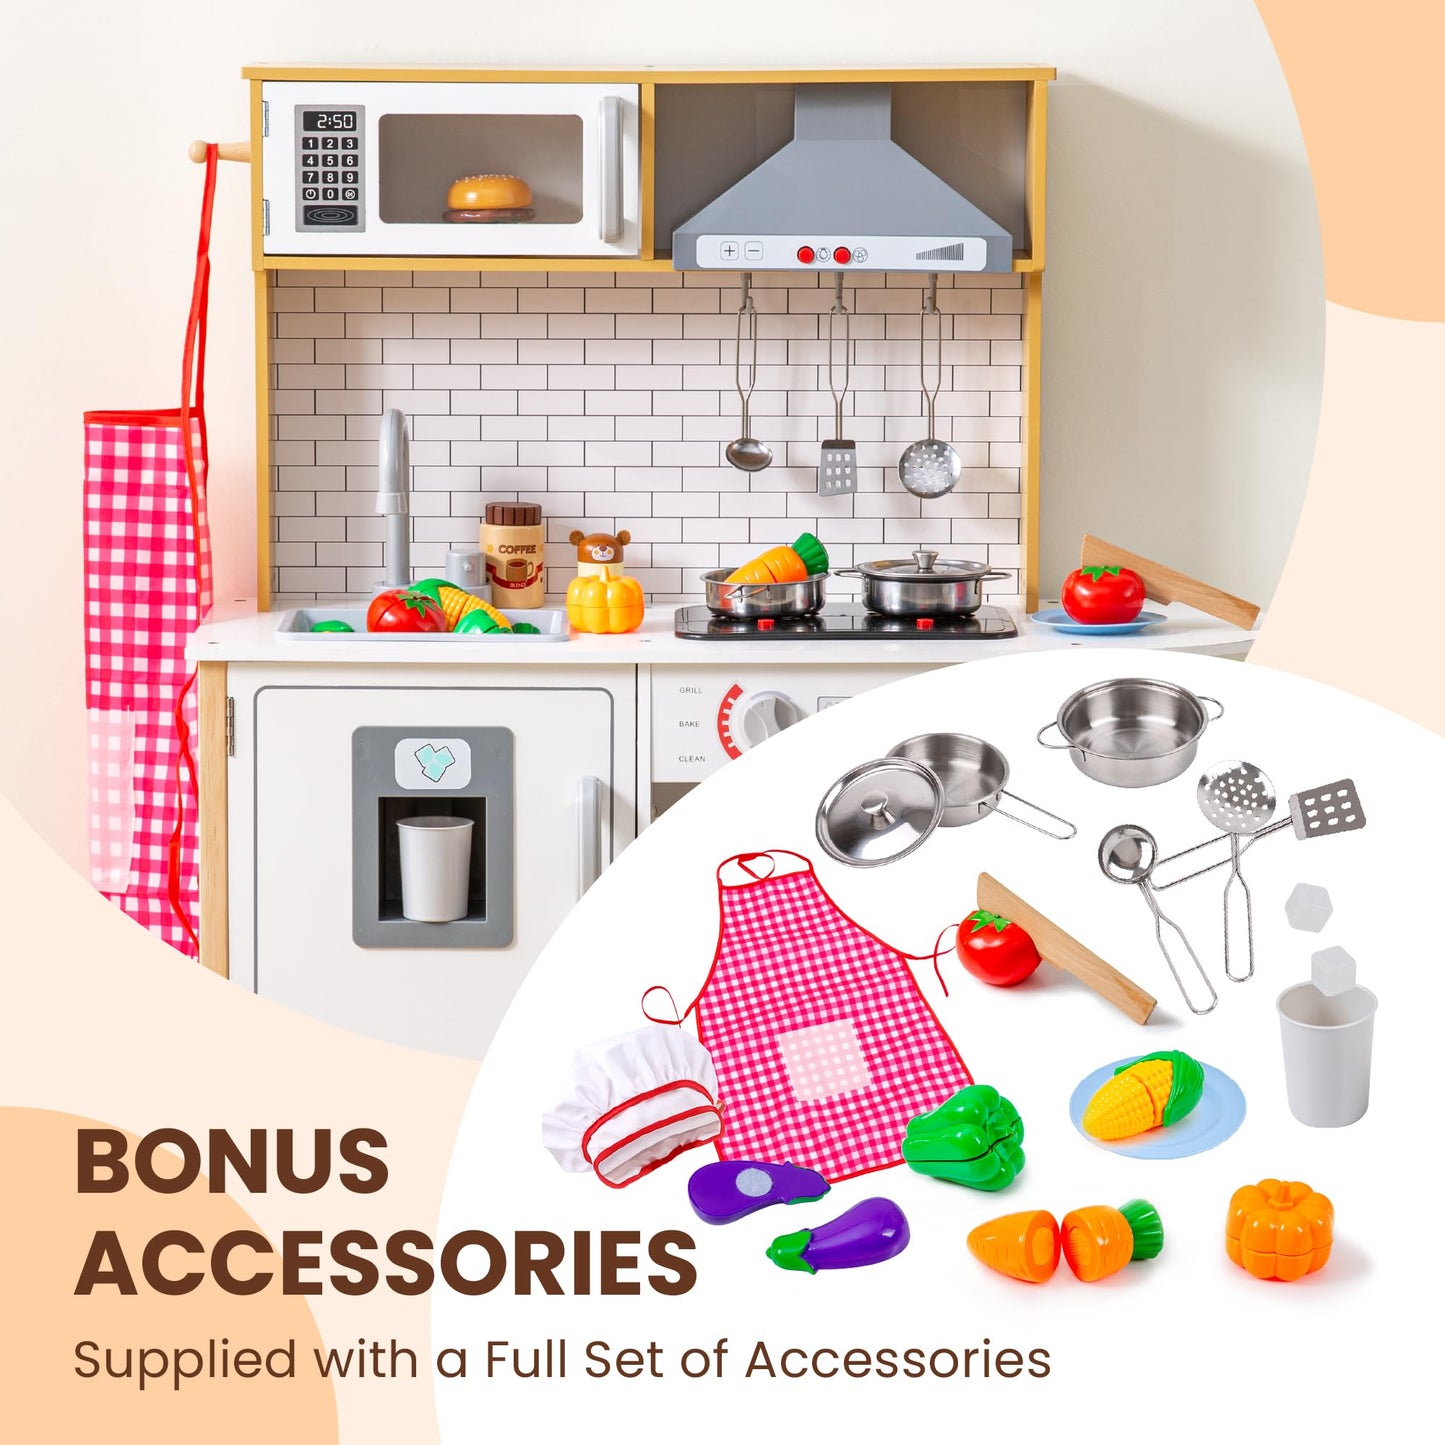 Tinysure Play Kitchen for Kids - Toy Kitchen Set for Toddlers with Realistic Lights and Sounds, Kids Kitchen Playset with Abundant Toy Food Set, Best Gift for Kids Ages 3+